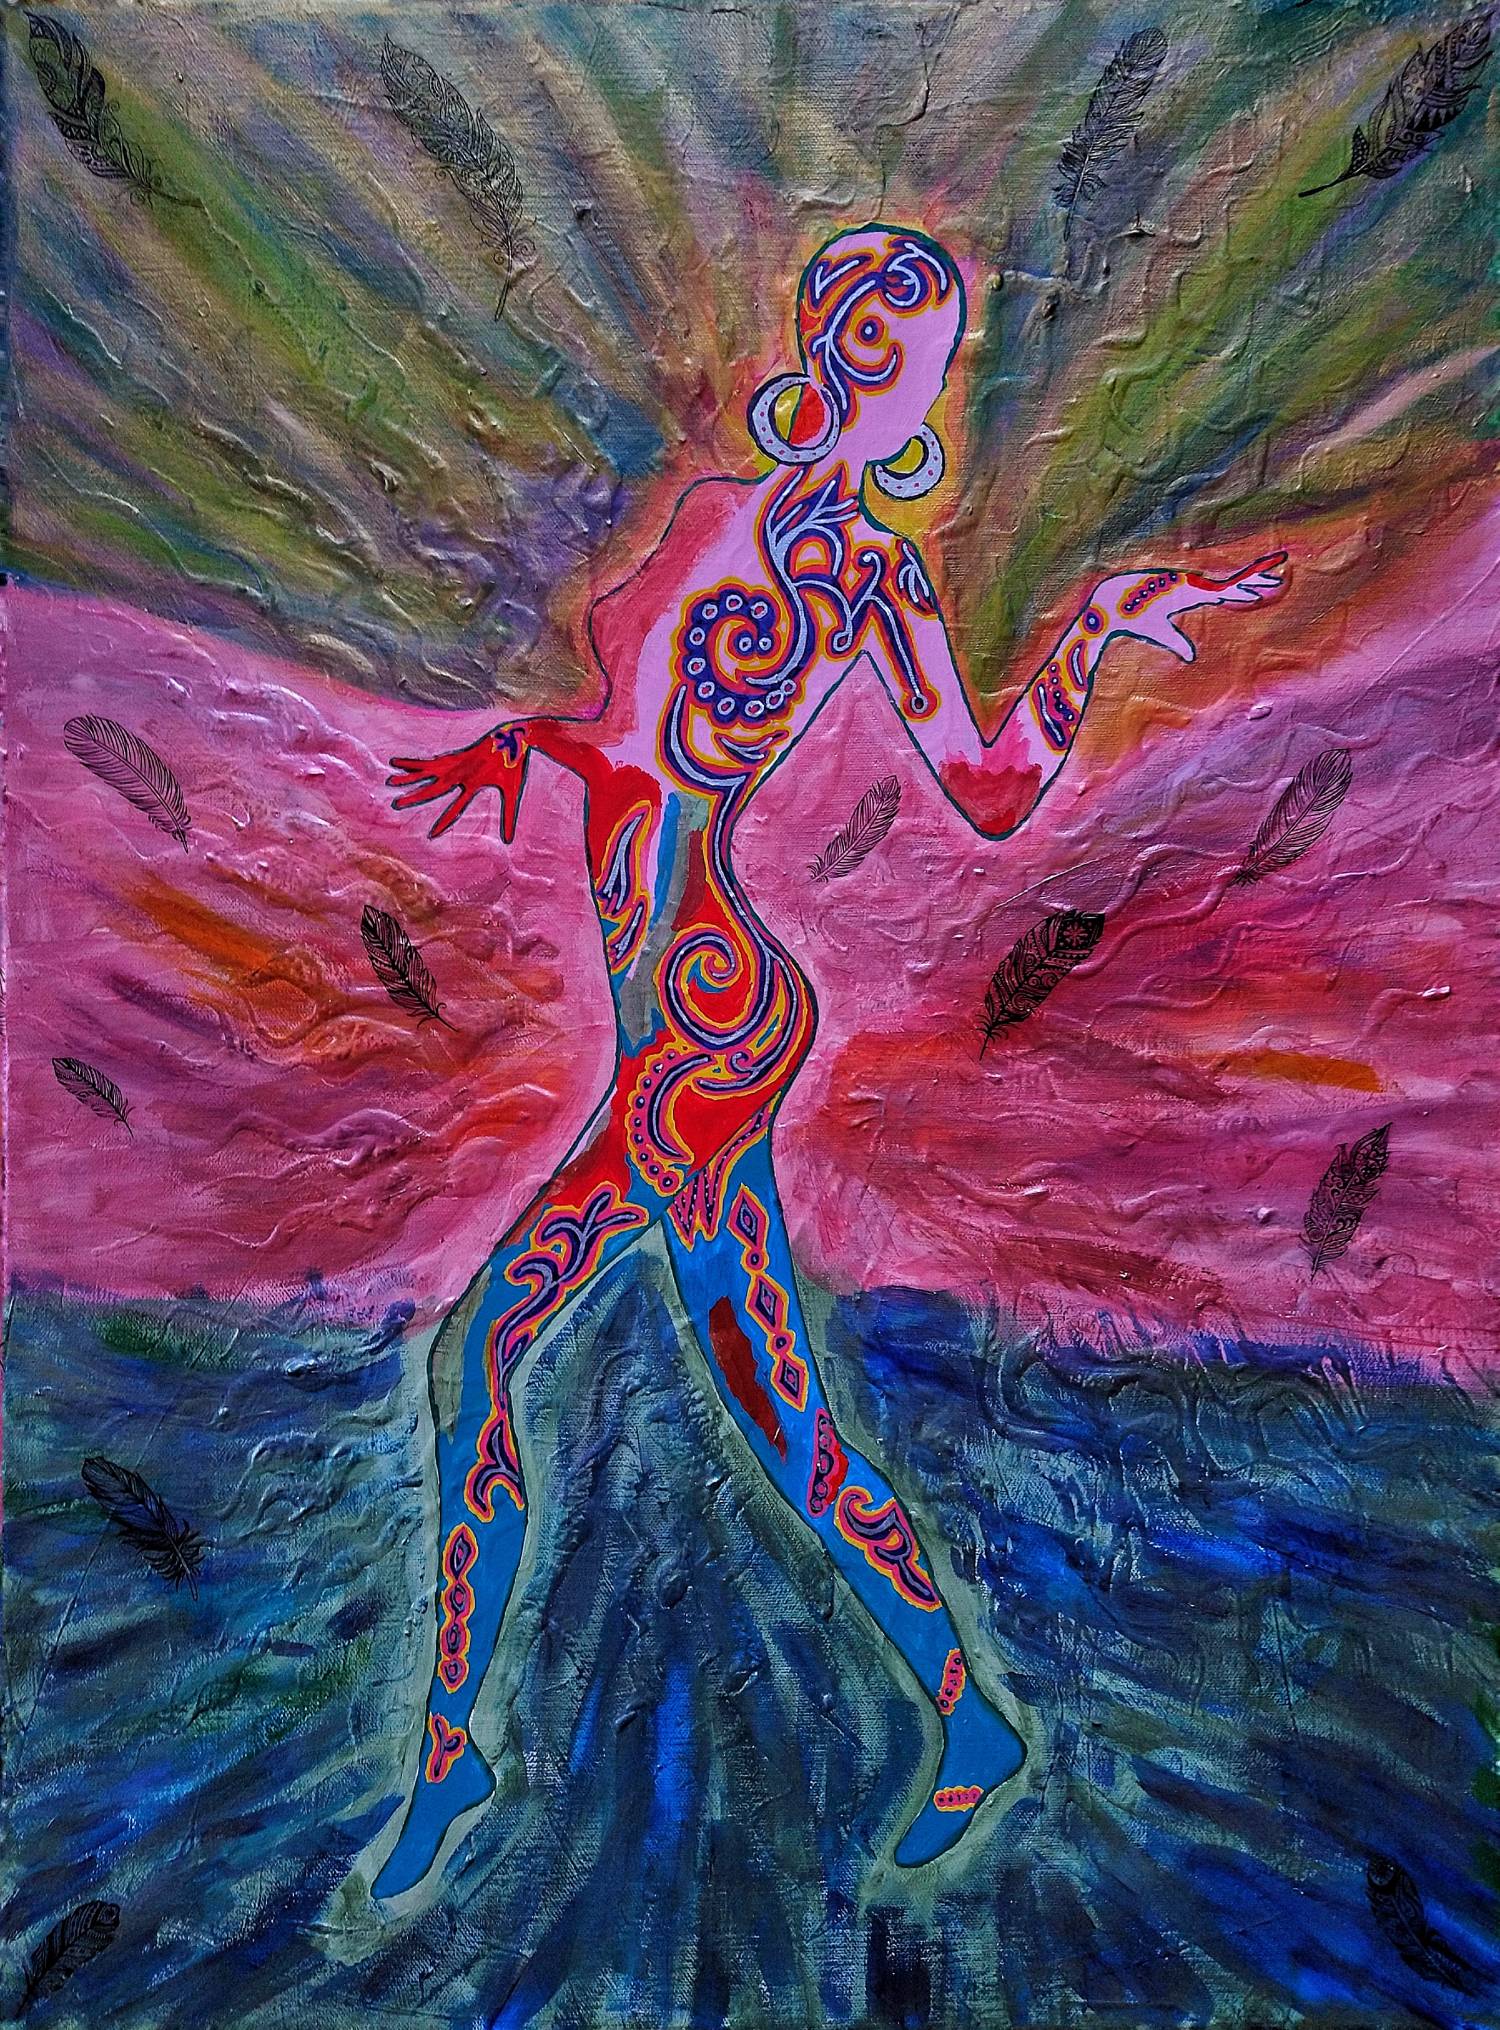 Artist Lena Snow's piece, "Spirit Dancer," which features a colorful outline of her inspiration.